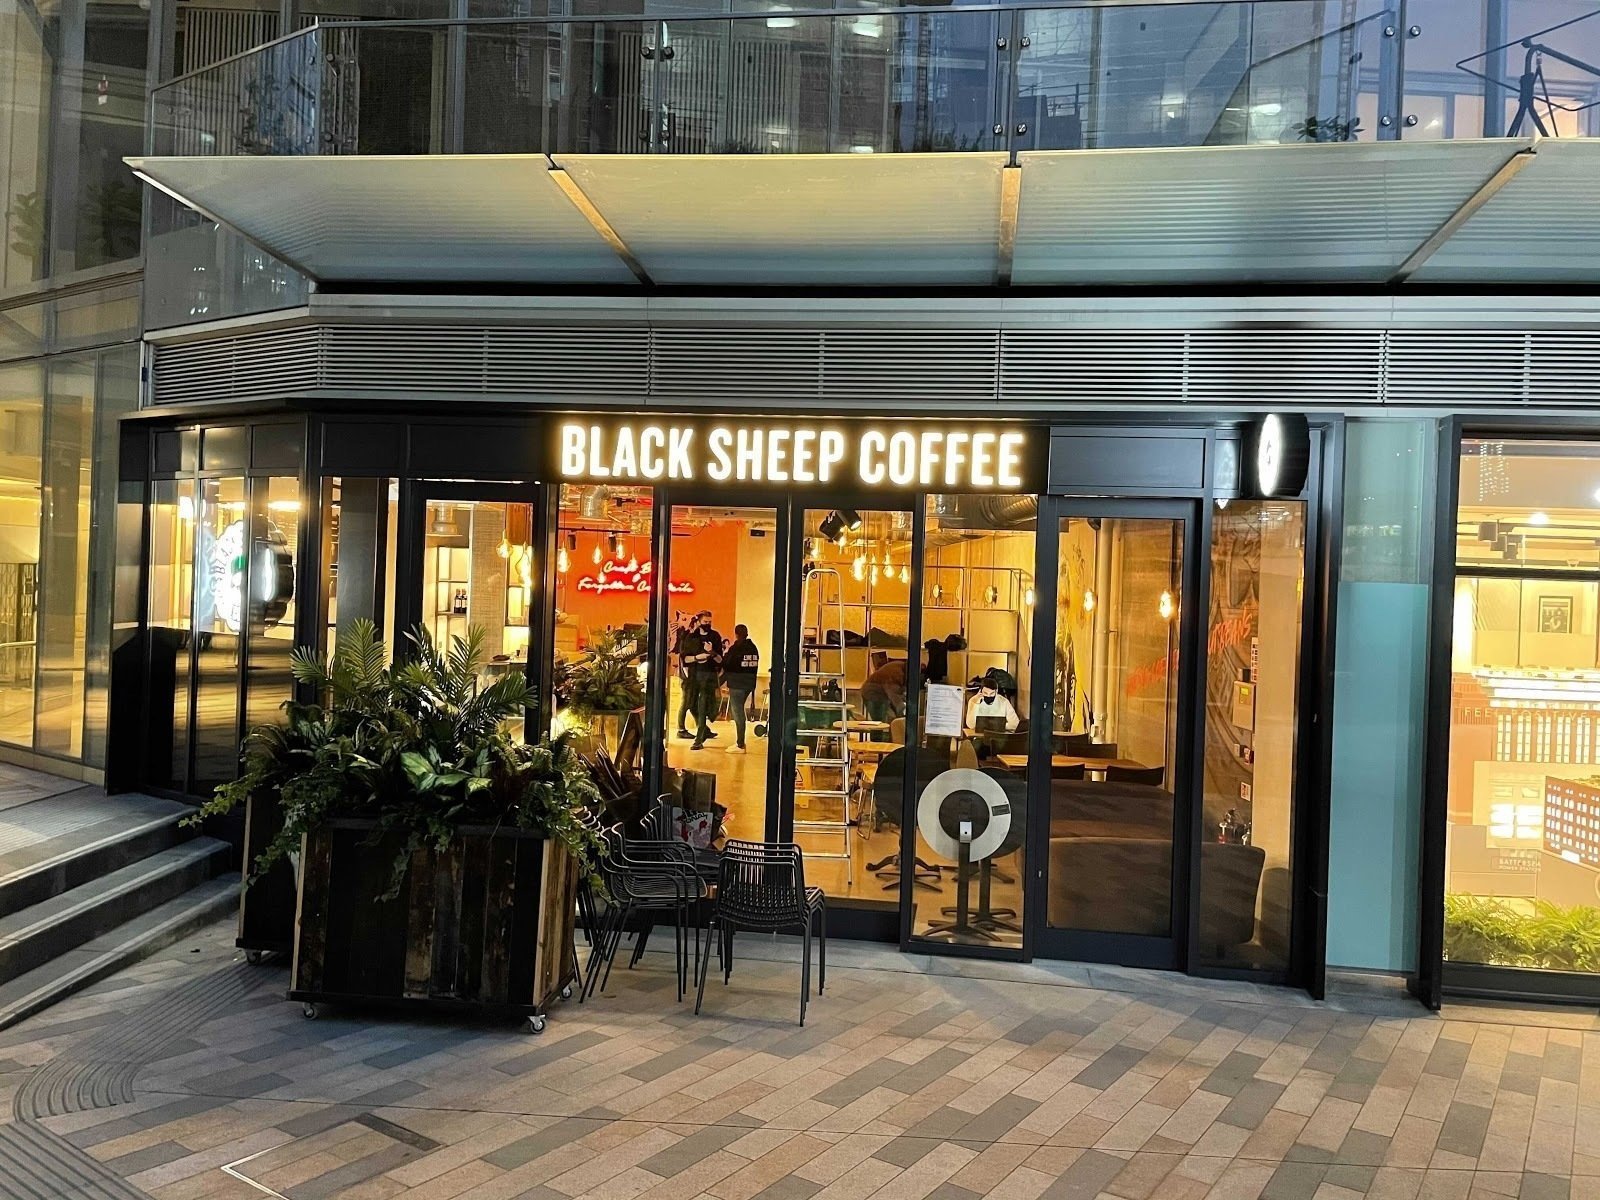 <span class="translation_missing" title="translation missing: en.meta.location_title, location_name: Black Sheep Coffee, city: London">Location Title</span>